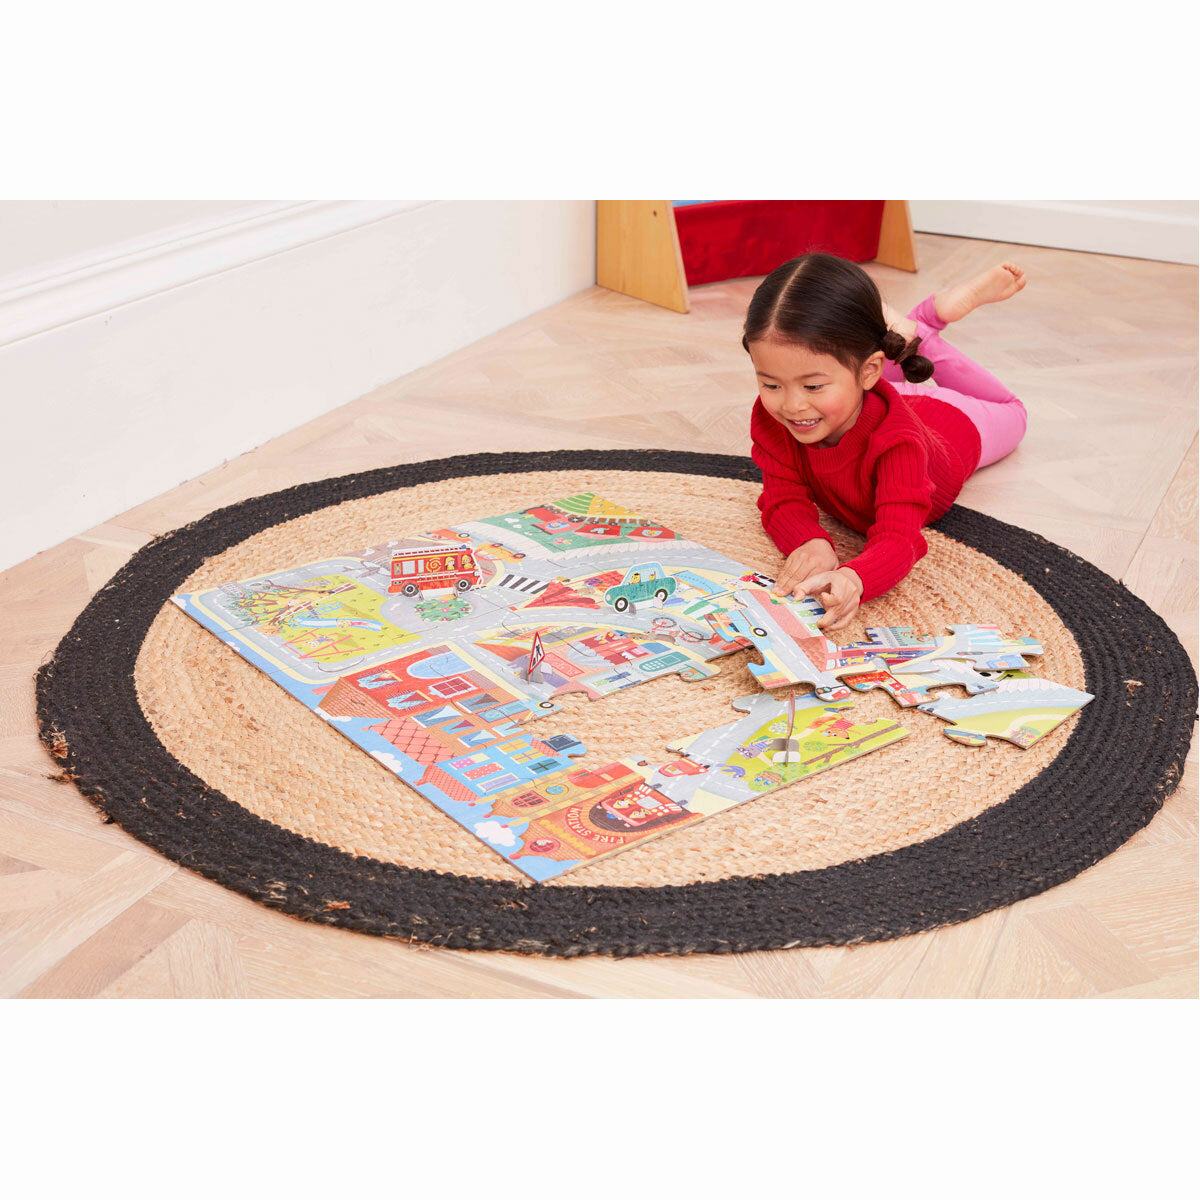 Busy Town 24 Piece Floor Jigsaw Puzzle